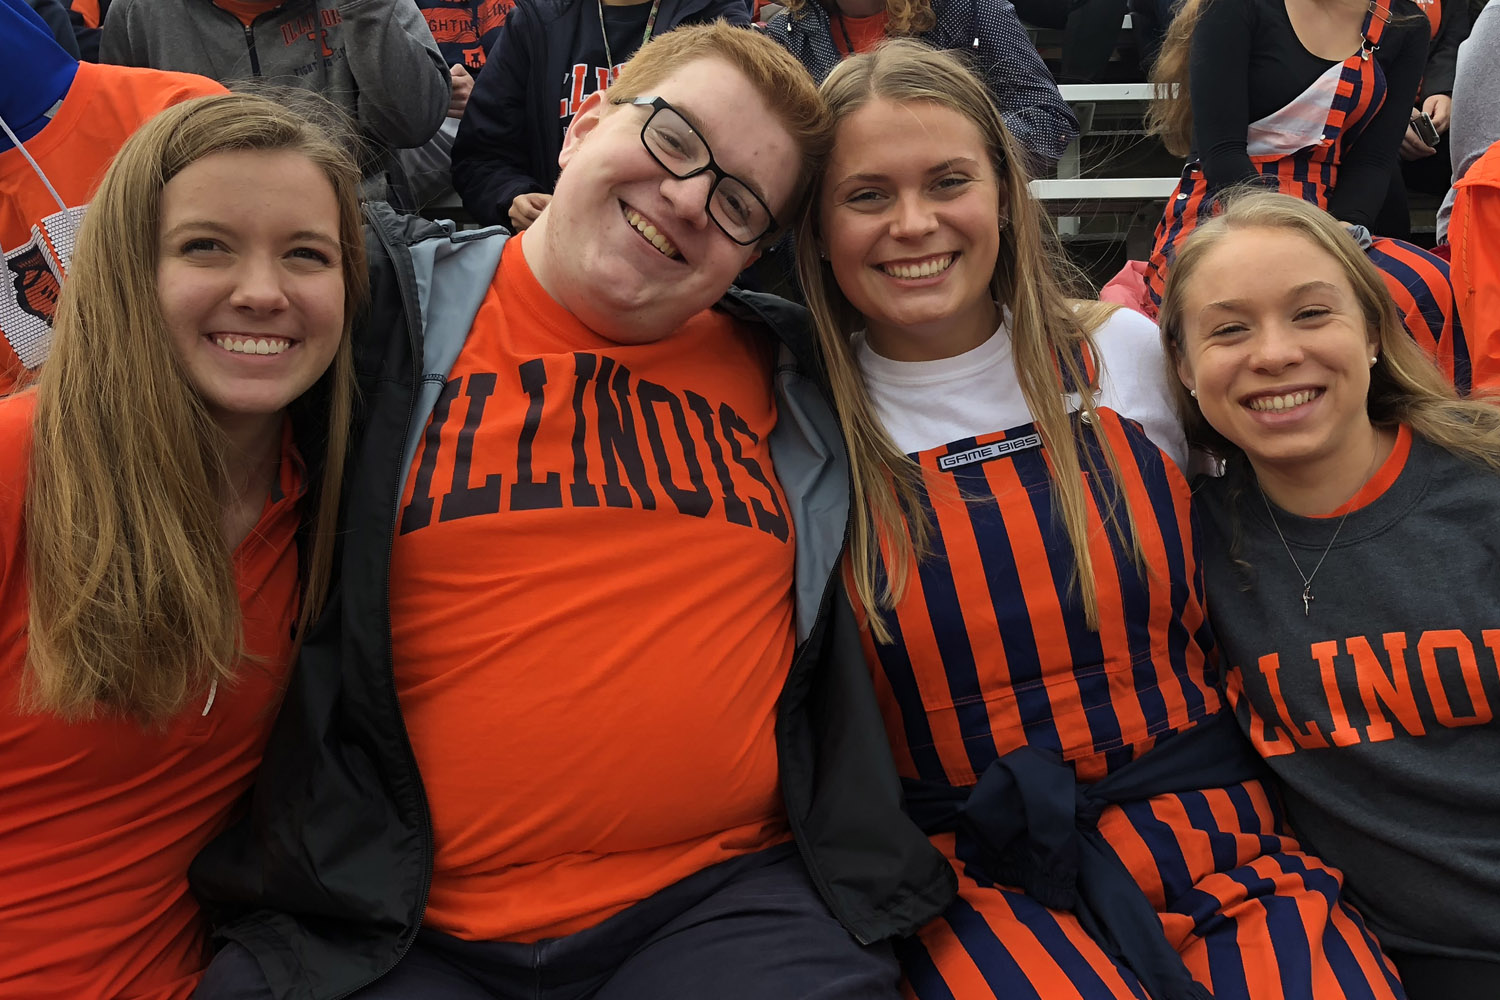 Megan and friends sporting Illini gear at a game.